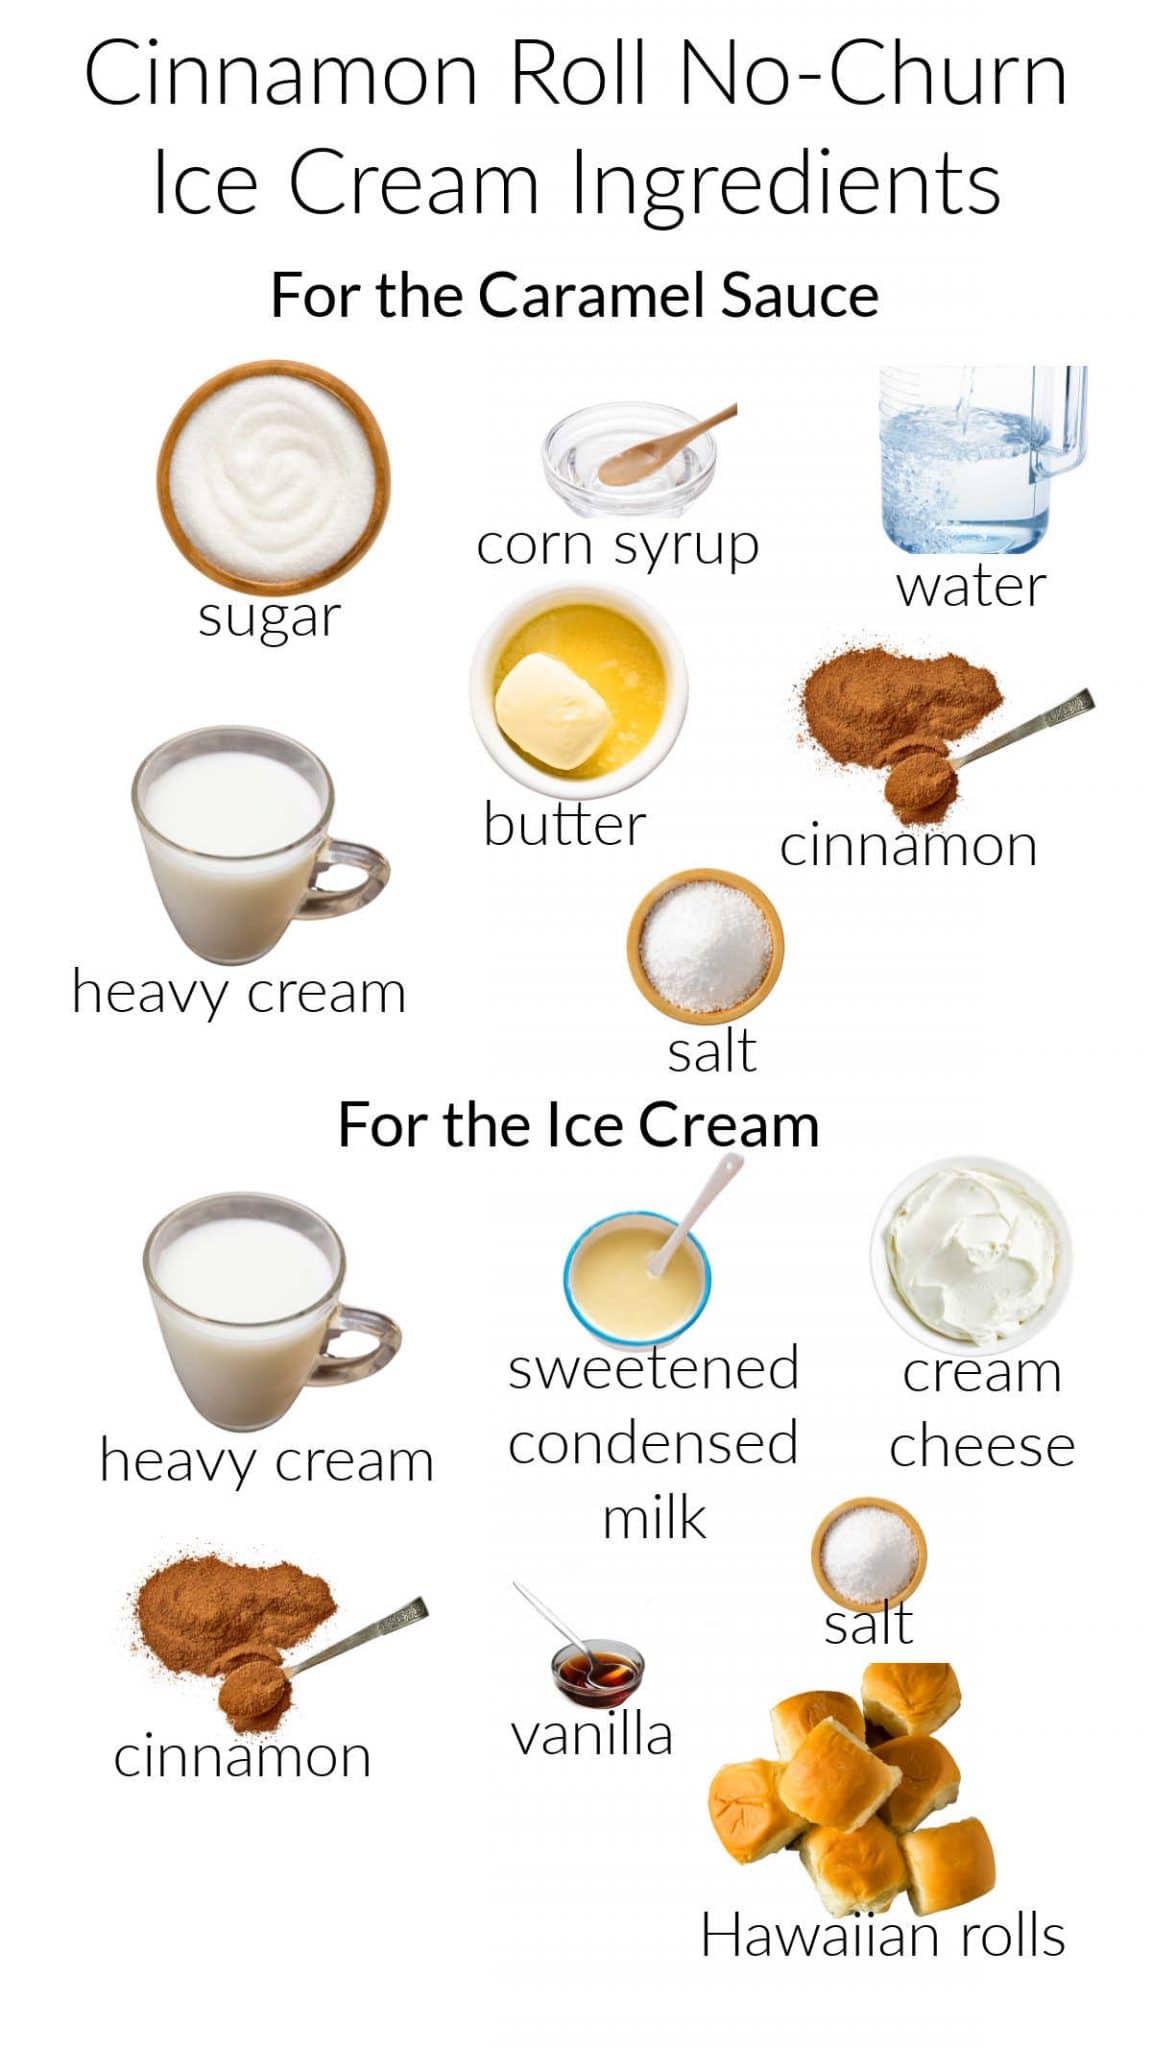 Collage of ingredients for making cinnamon roll ice cream. For the caramel sauce: sugar, corn syrup, water, heavy cream, butter, cinnamon, salt, and for the ice cream: heavy cream, sweetened condensed milk, cream cheese, cinnamon, vanilla, salt, and Hawaiian rolls.